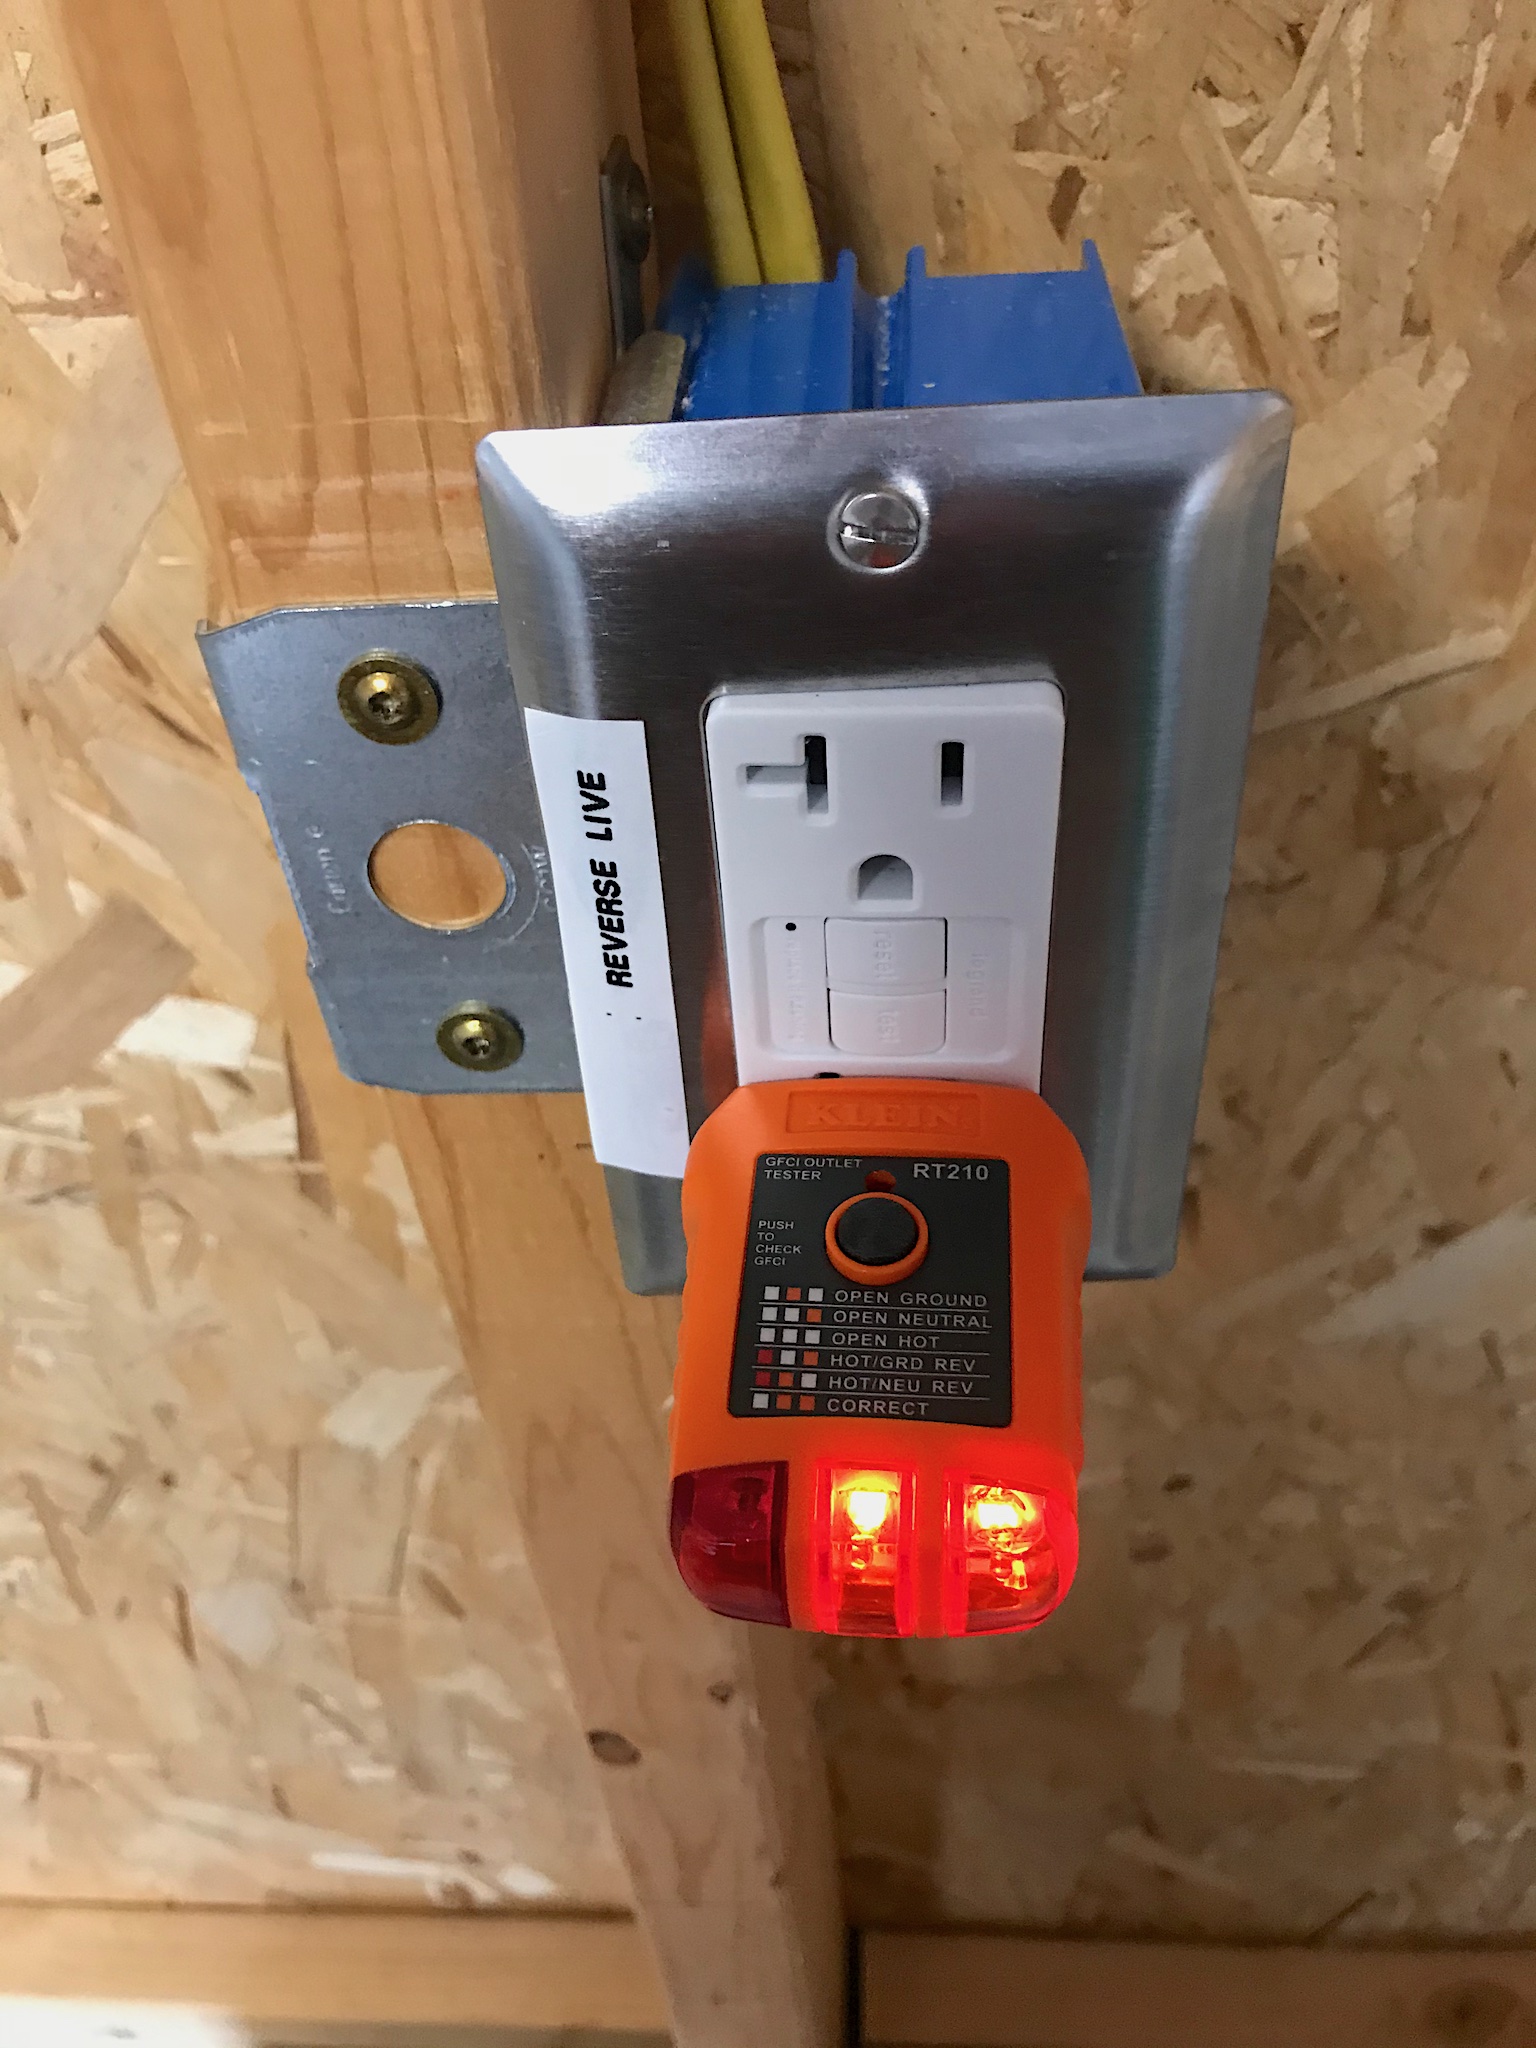 An outlet being tested after it was identified as having the live and neutral swapped